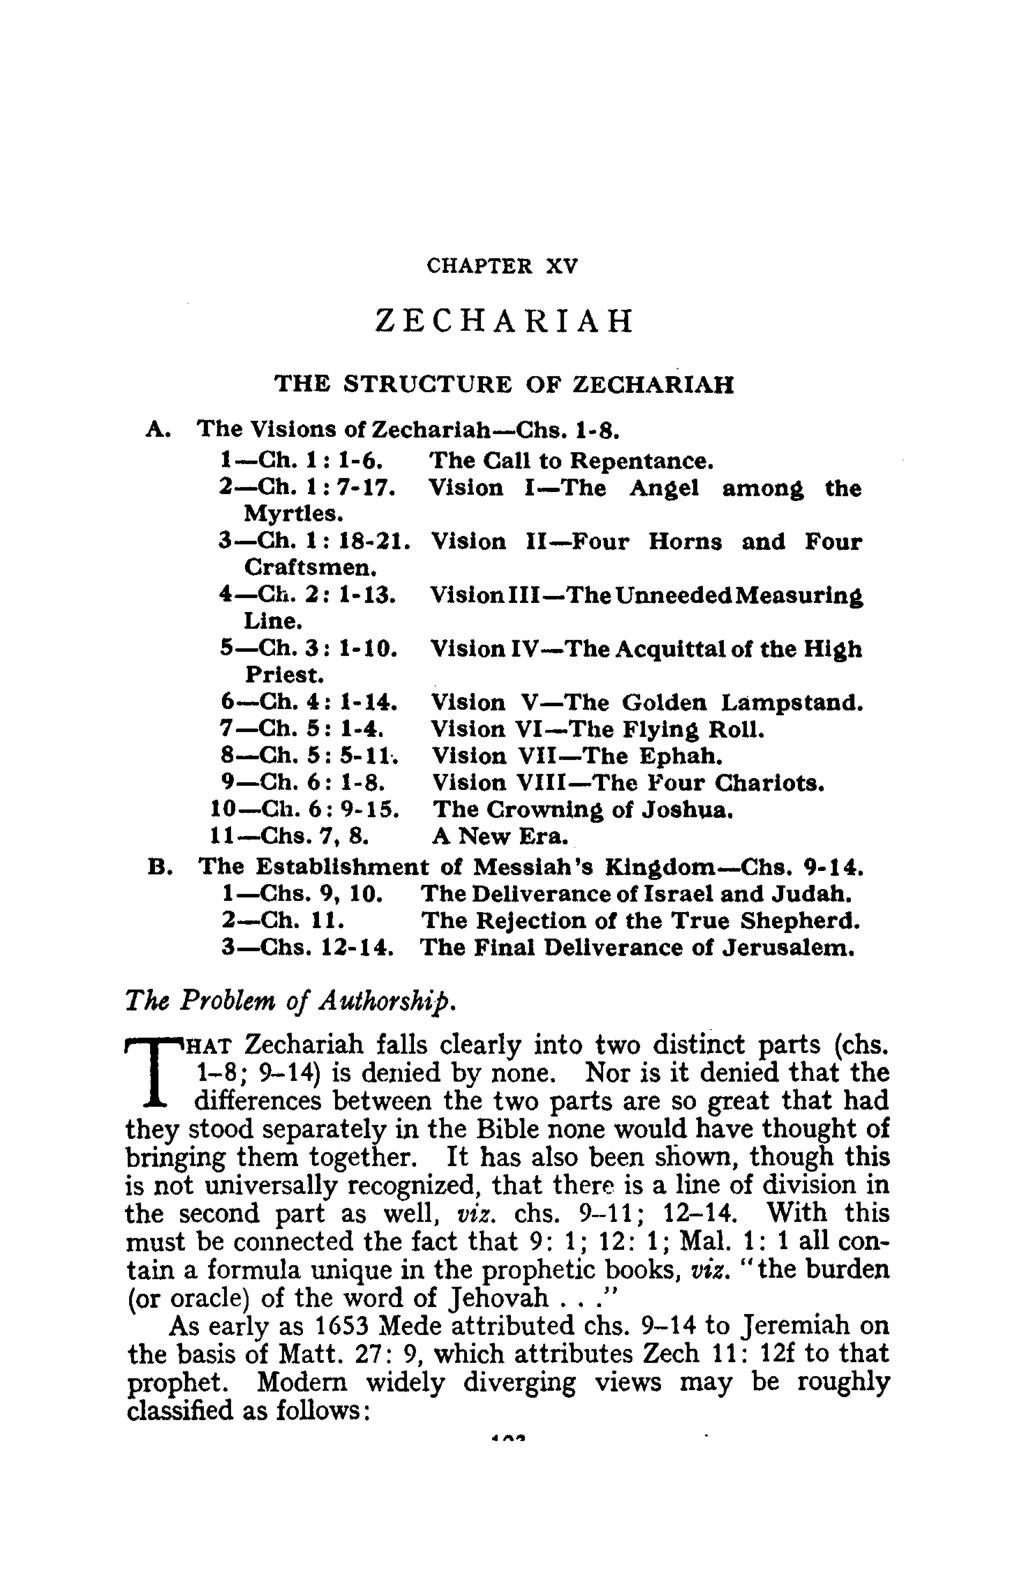 CHAPTER XV ZECHARIAH THE STRUCTURE OF ZECHARIAH A. The Visions of Zechariah-Chs. 1 8. I-Ch. 1: 1-6. The CaU to Repentance. 2-Ch. 1: 7-17. Vision I-The Angel among the Myrtles. 3-Ch. 1: 18 21.